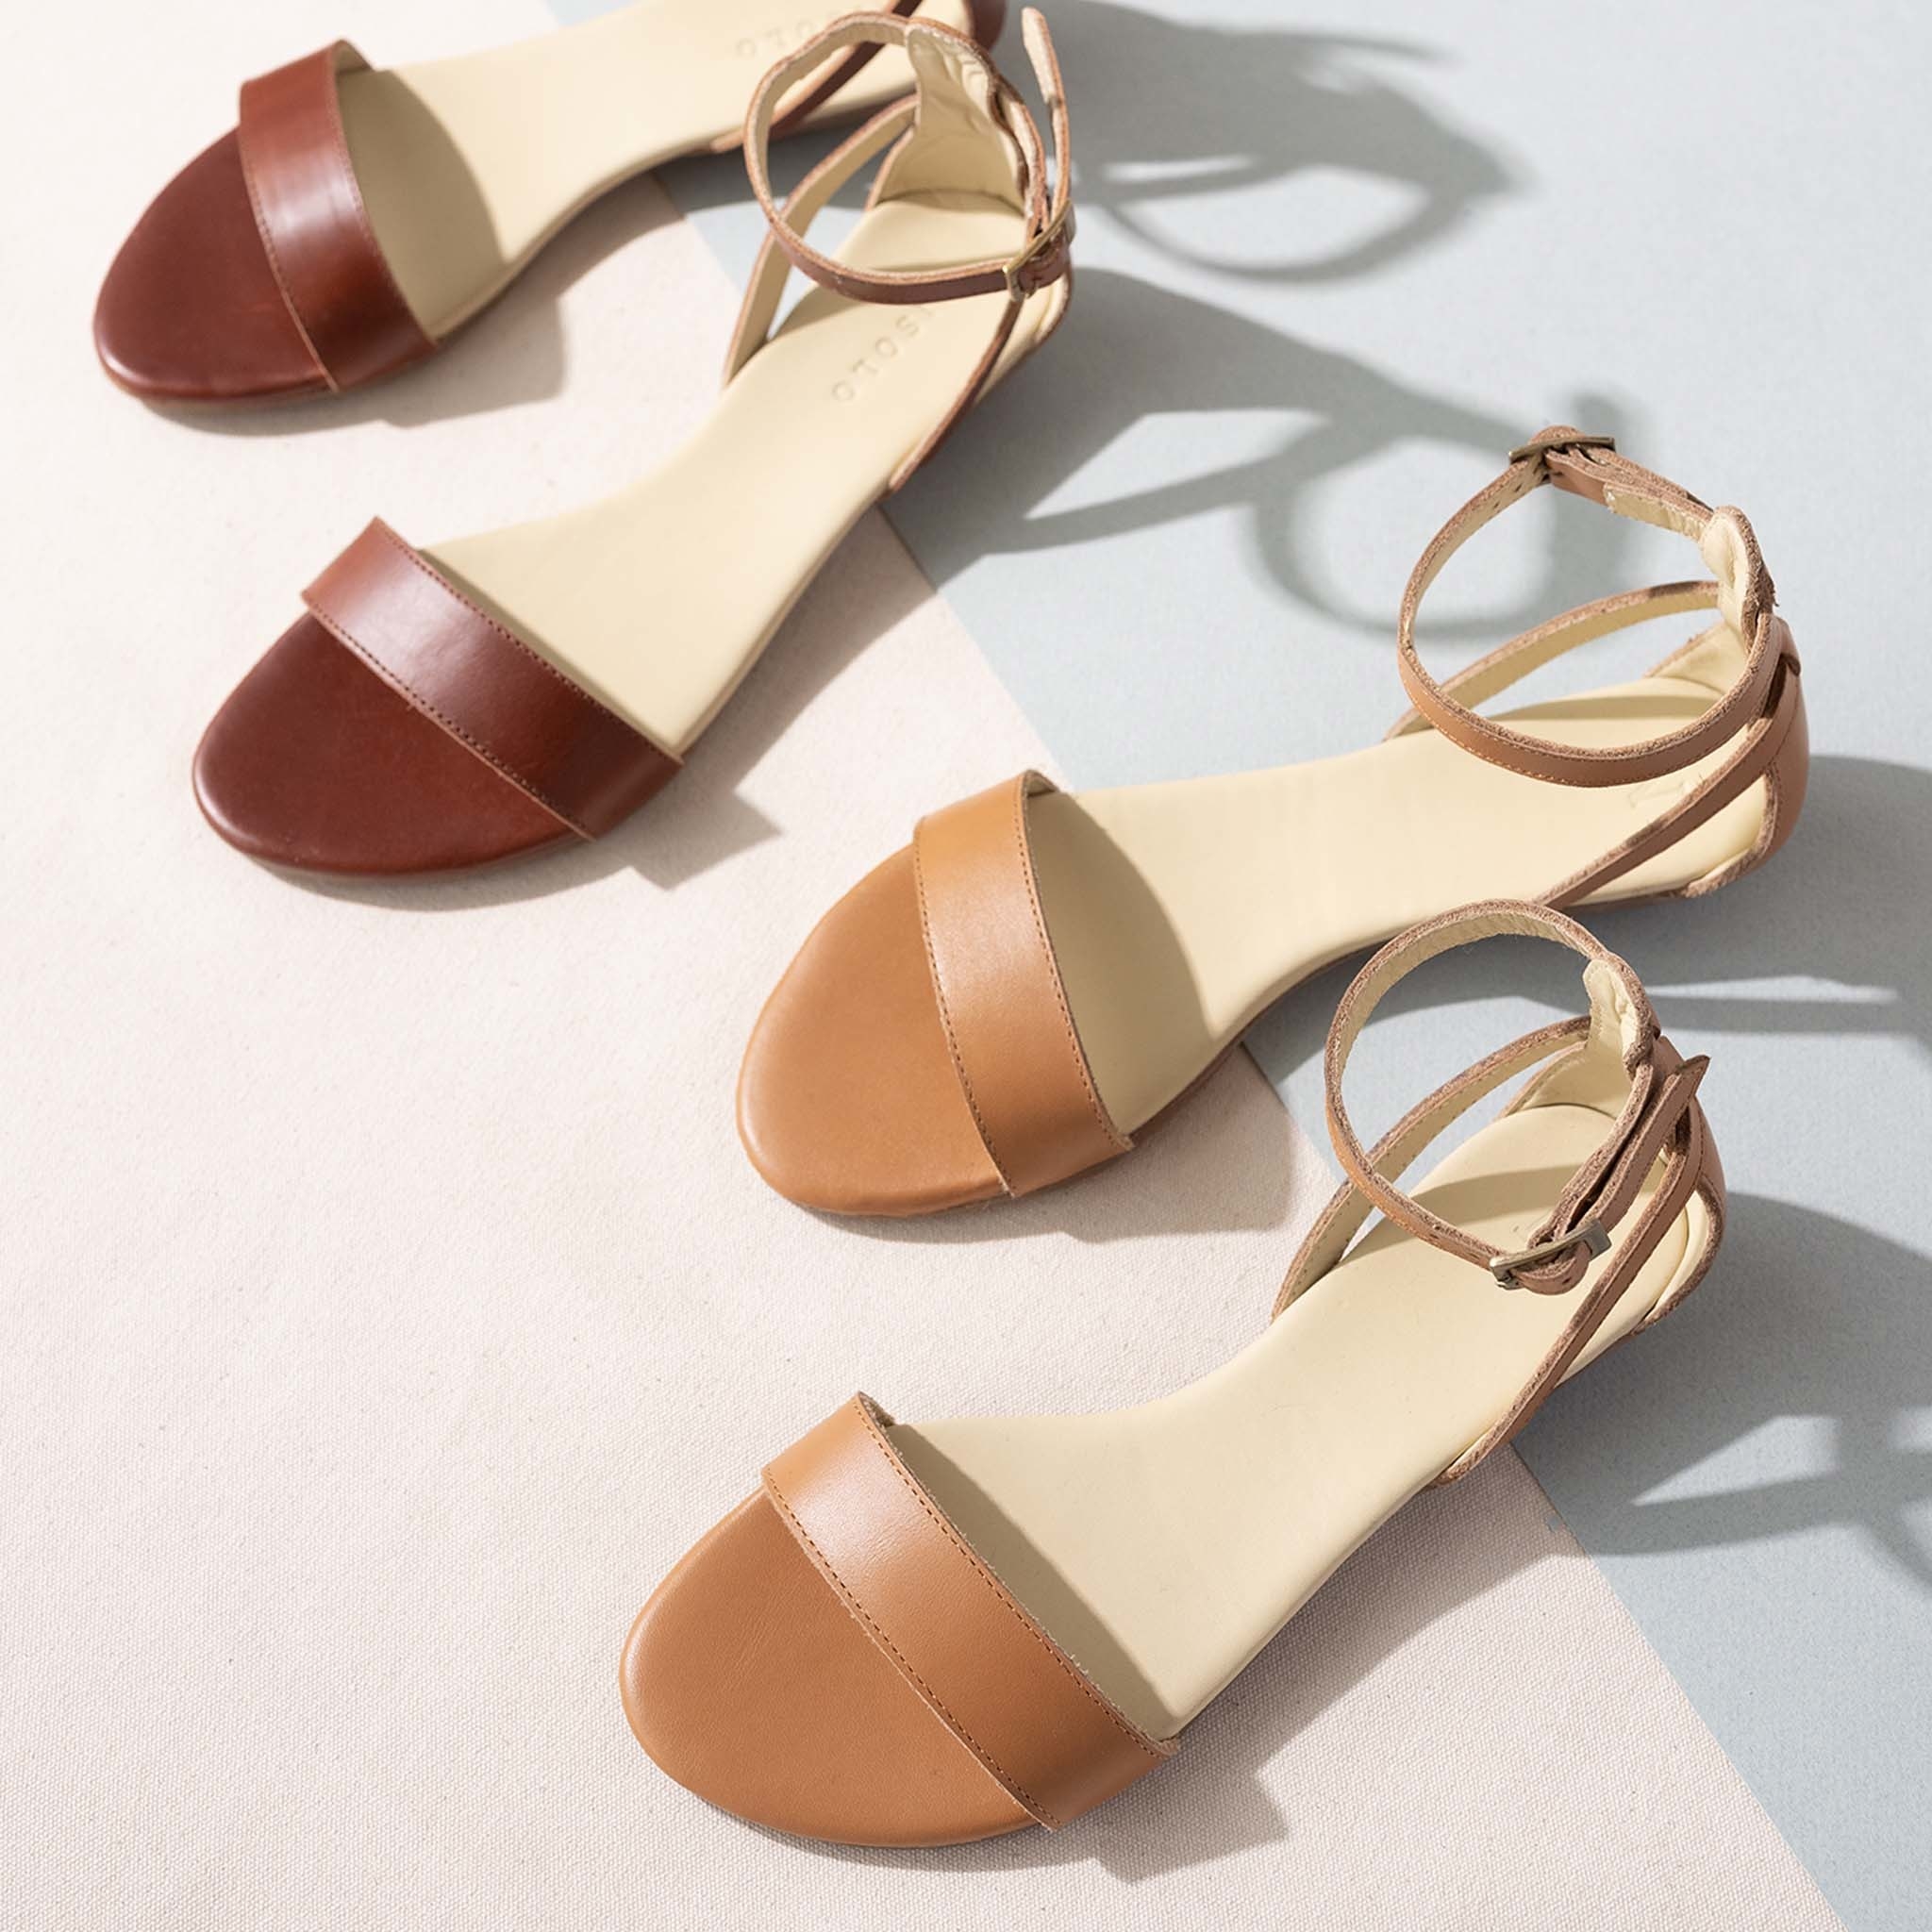 two pairs of the sandals. one in tan and one in dark red.